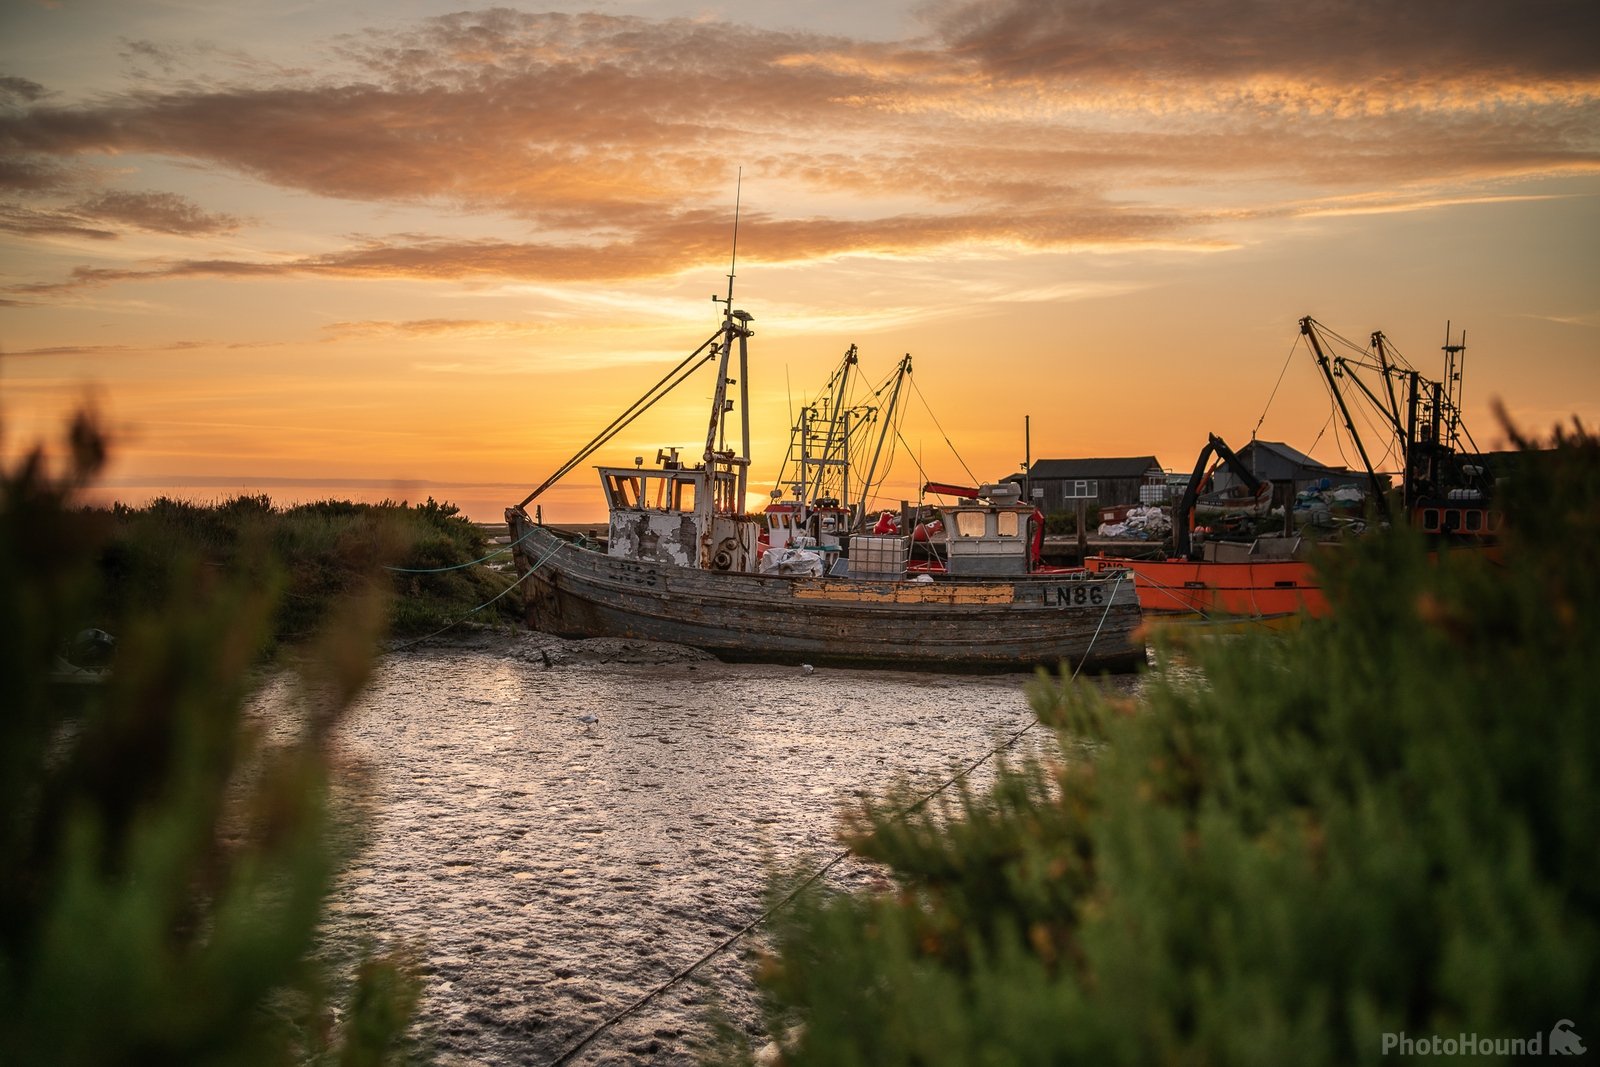 Image of Brancaster Staithe by James Billings.